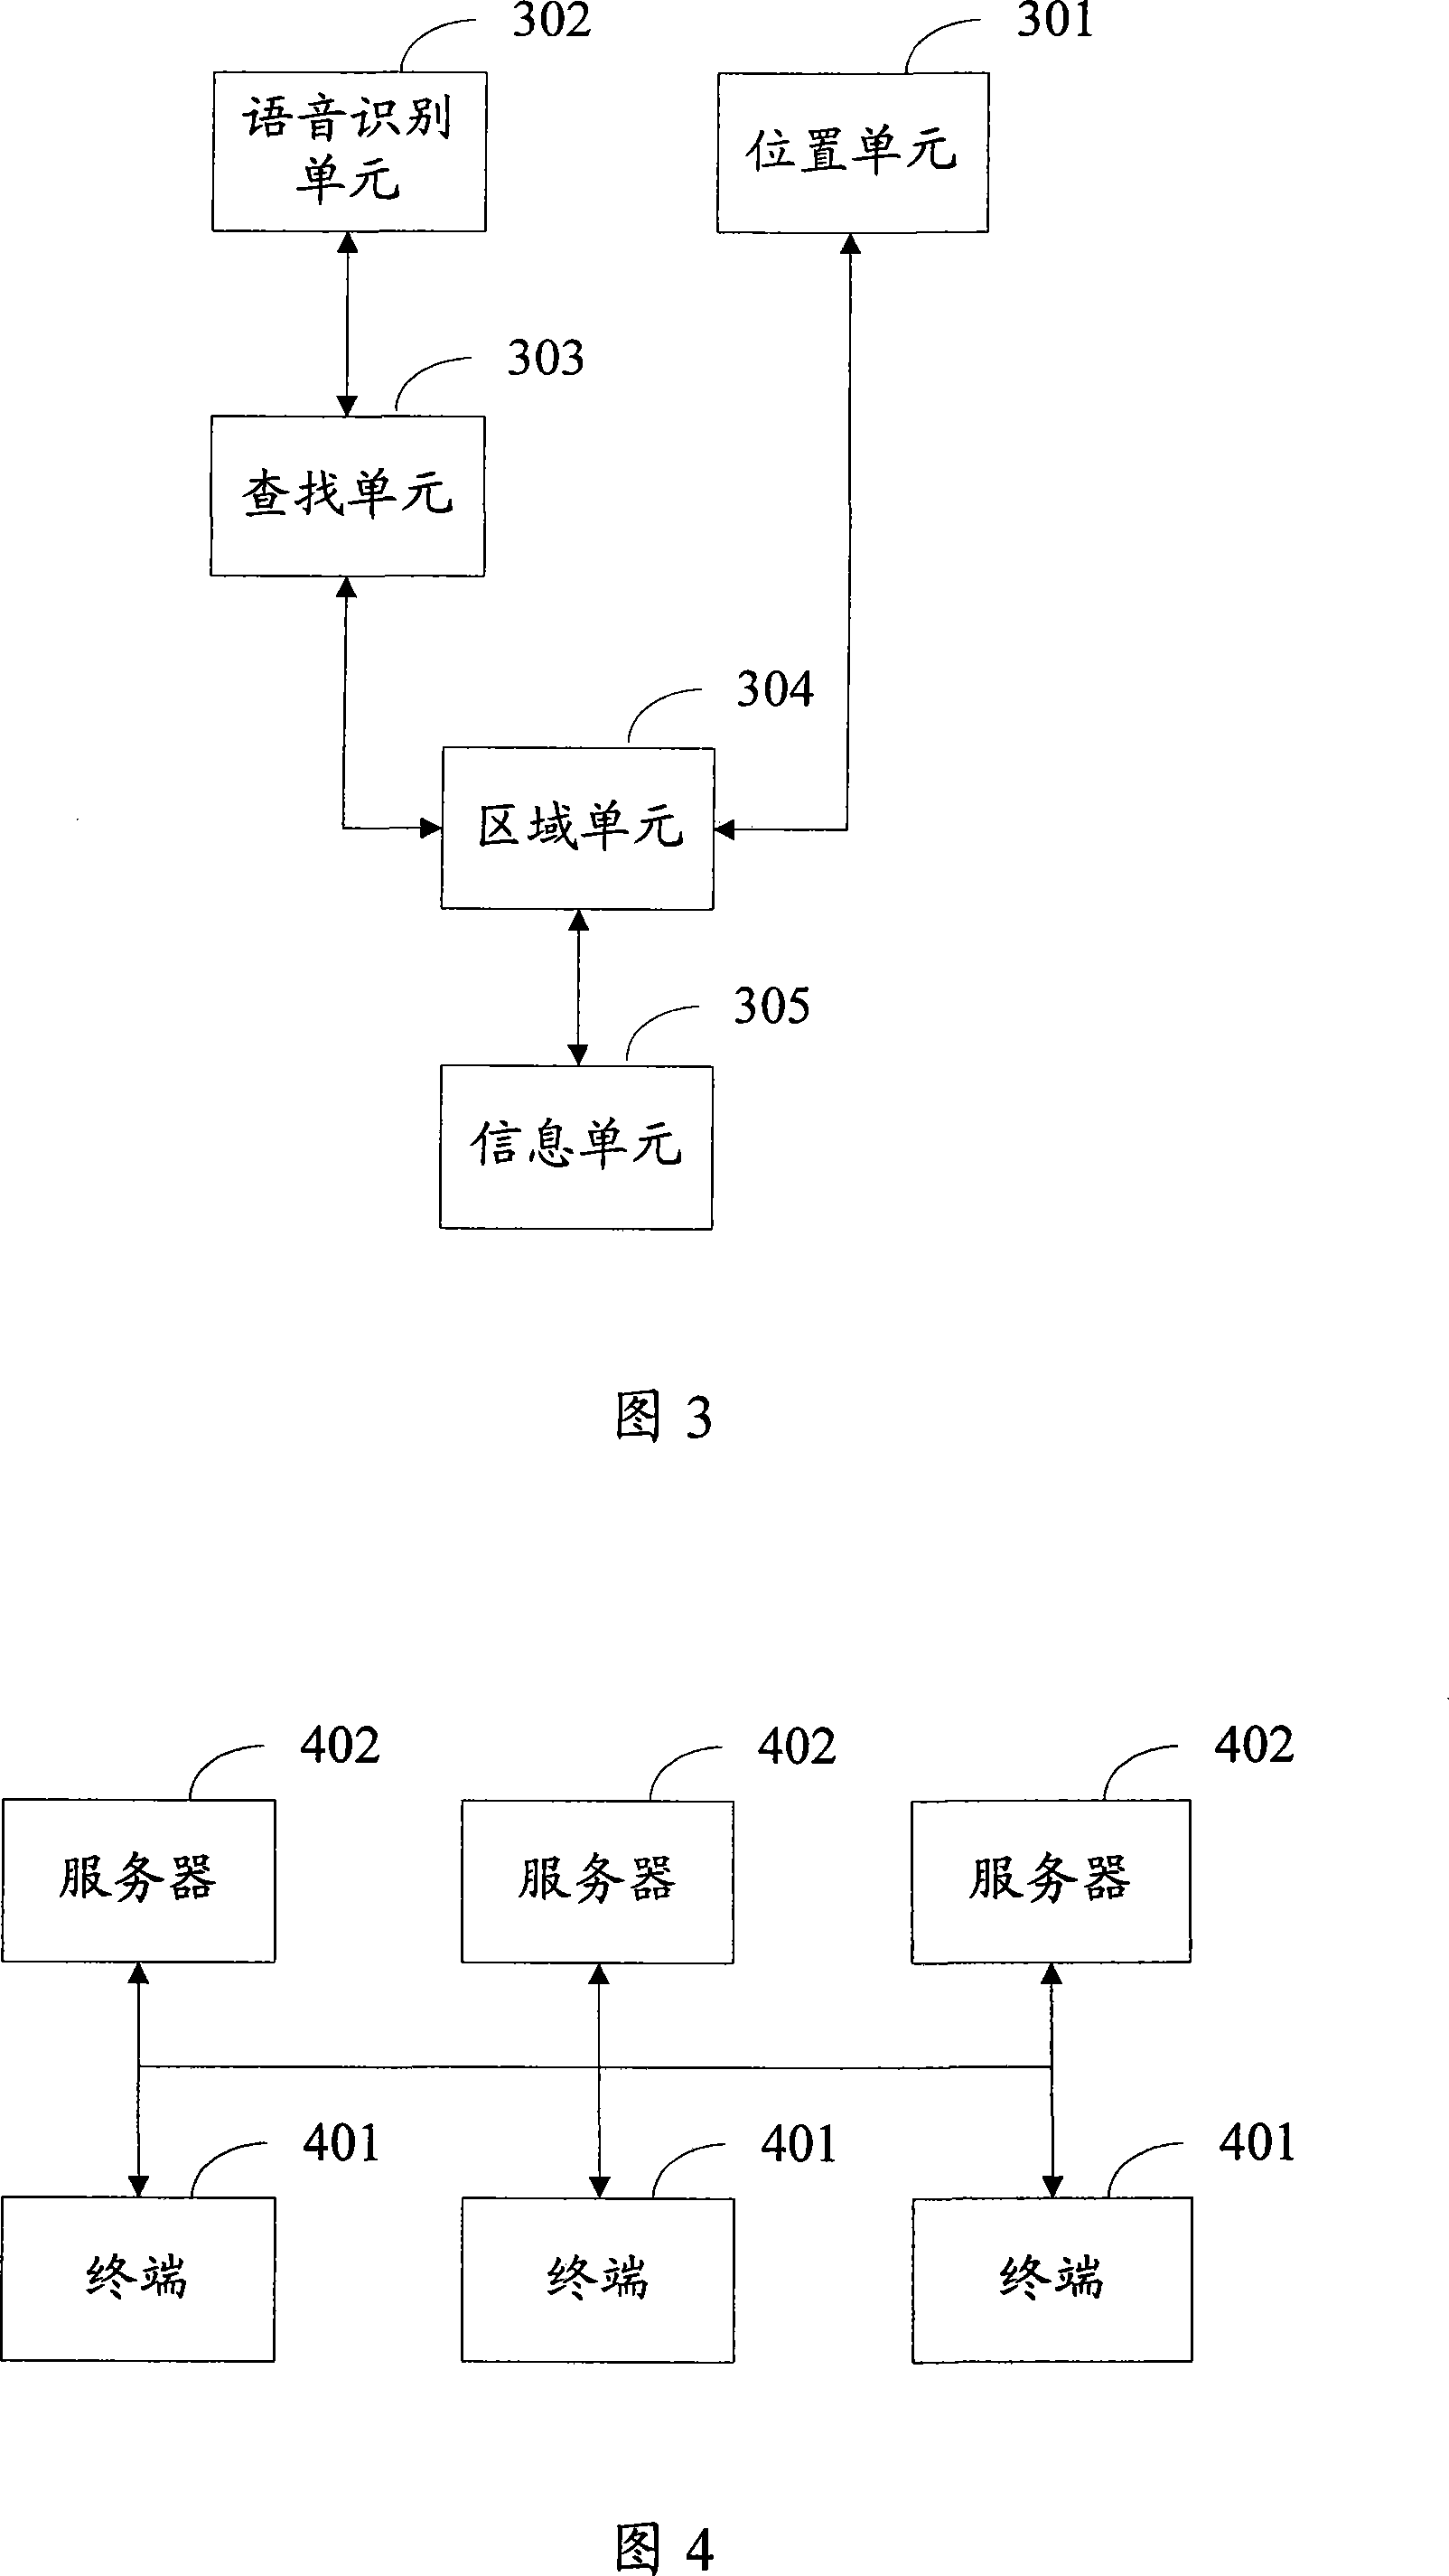 Method and device for issuing tour guide information